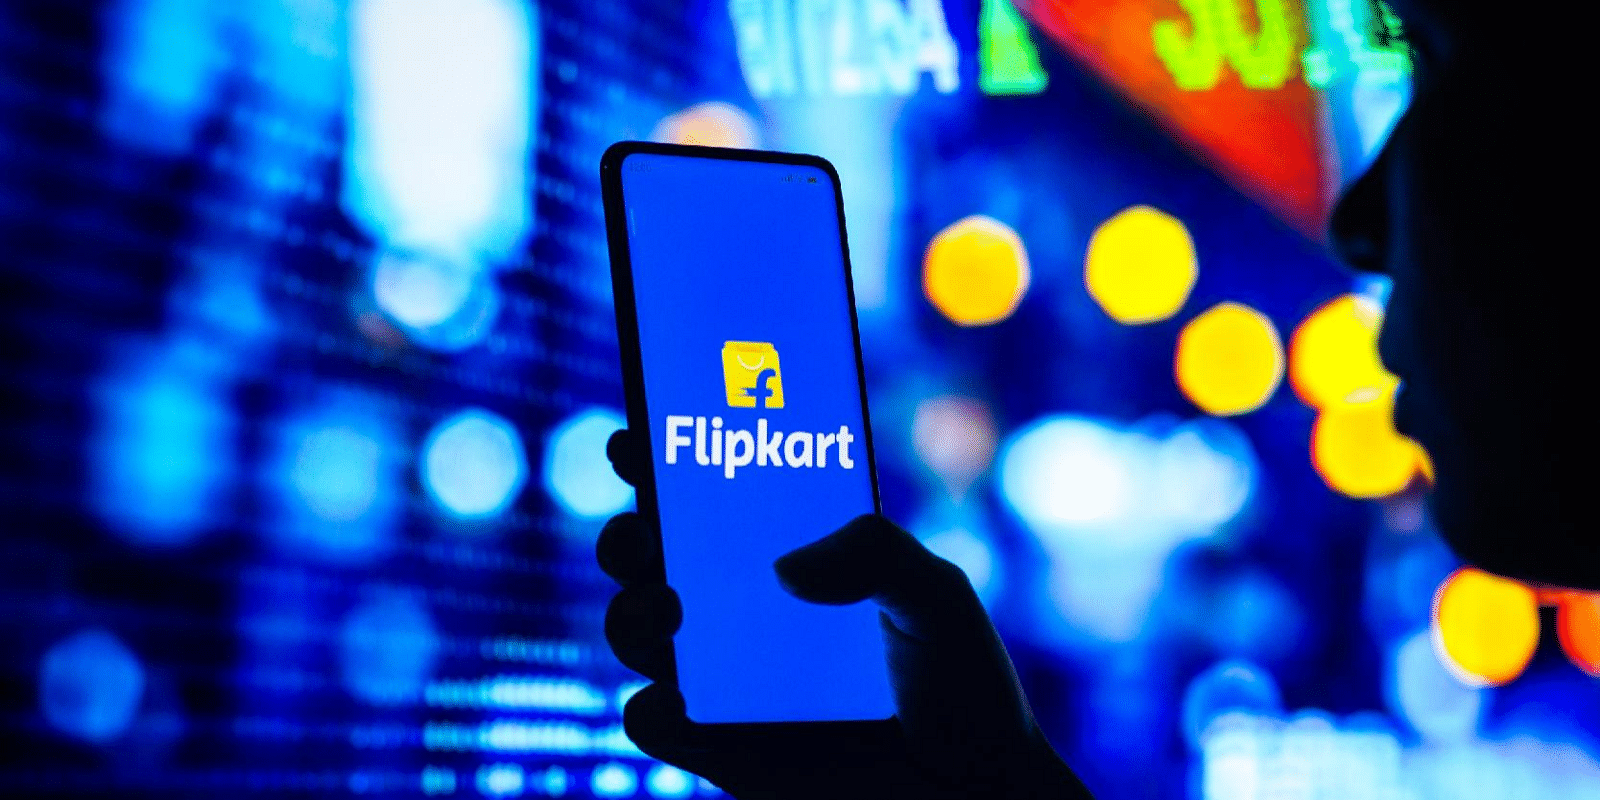 Flipkart to introduce same-day delivery for ecommerce orders in February